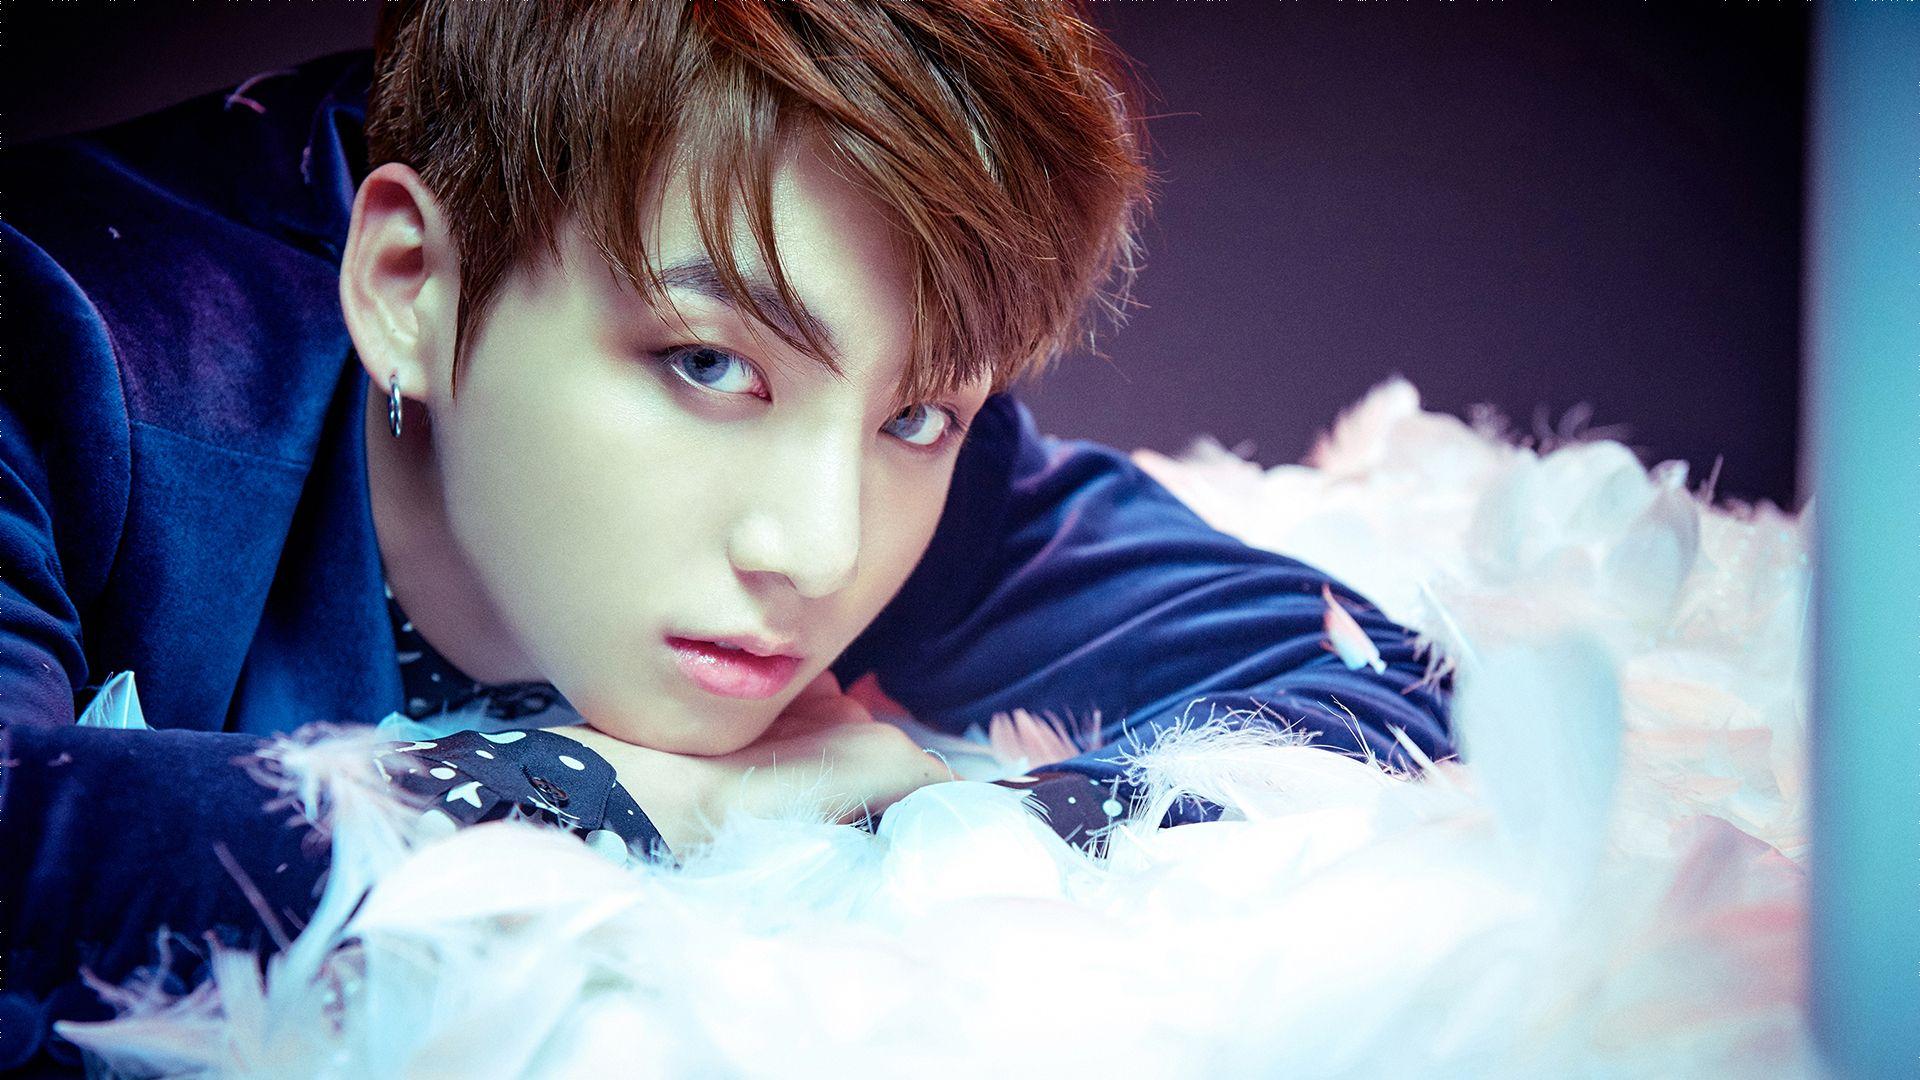 Collection of Jungkook Desktop Wallpaper (image in Collection)